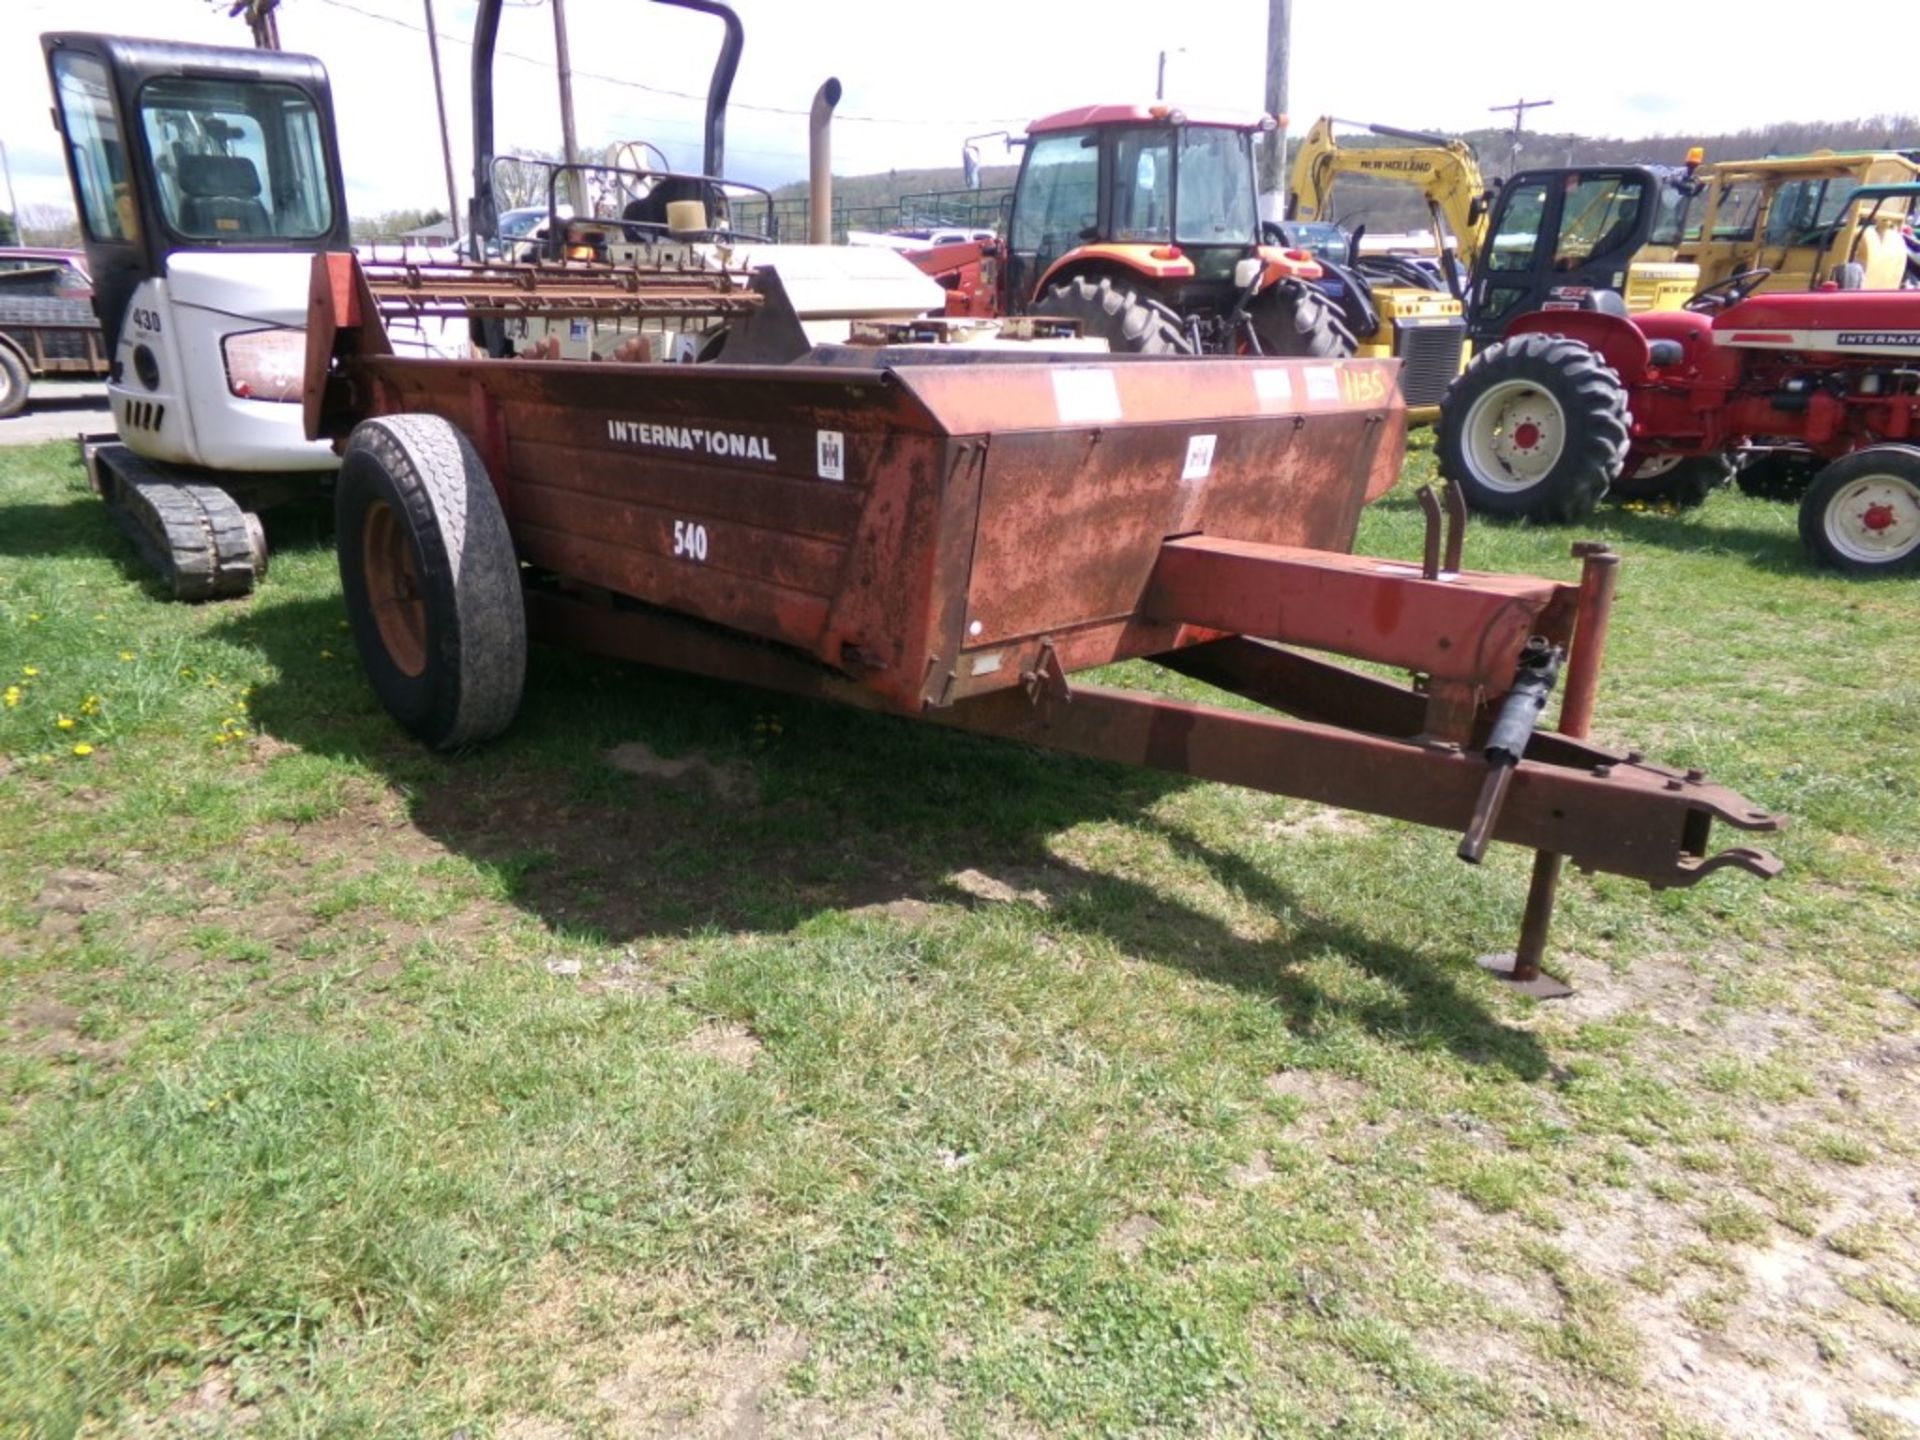 International 540 Manure Spreader, Good Working Condition (5822) - Image 2 of 3